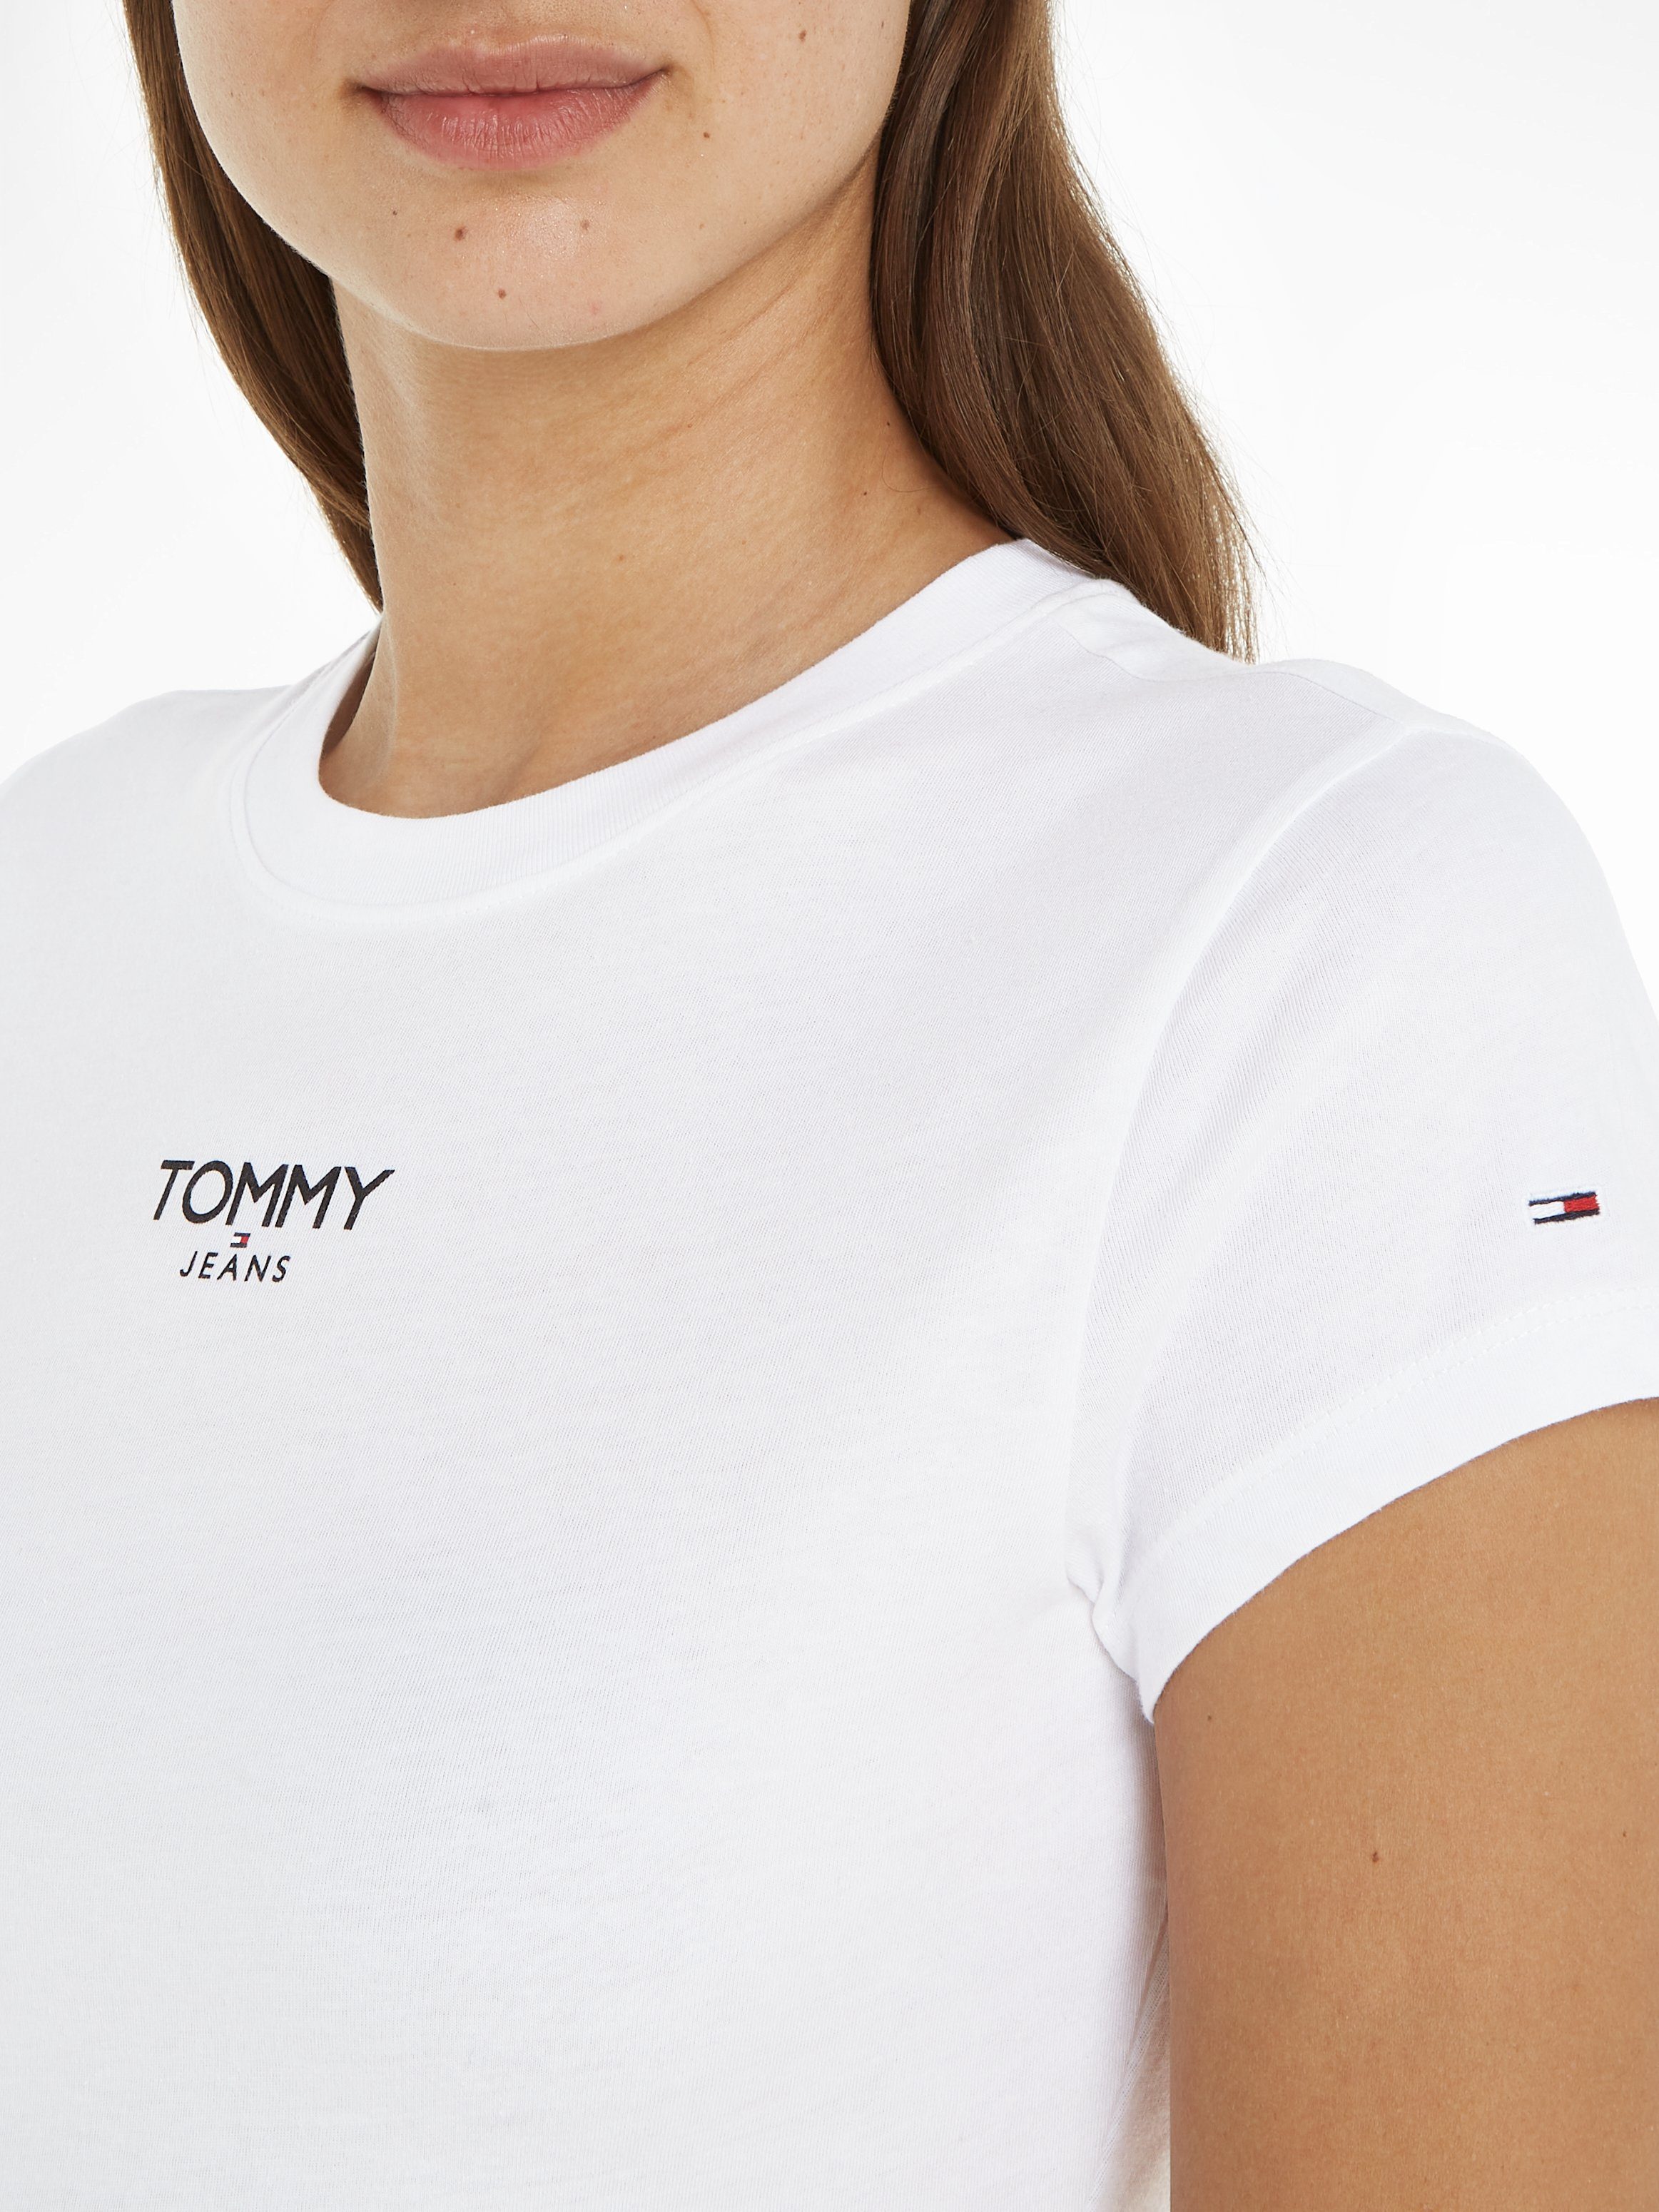 Tommy Jeans T-Shirt TJW 1 LOGO White SS Tommy BBY Logo mit Jeans ESSENTIAL